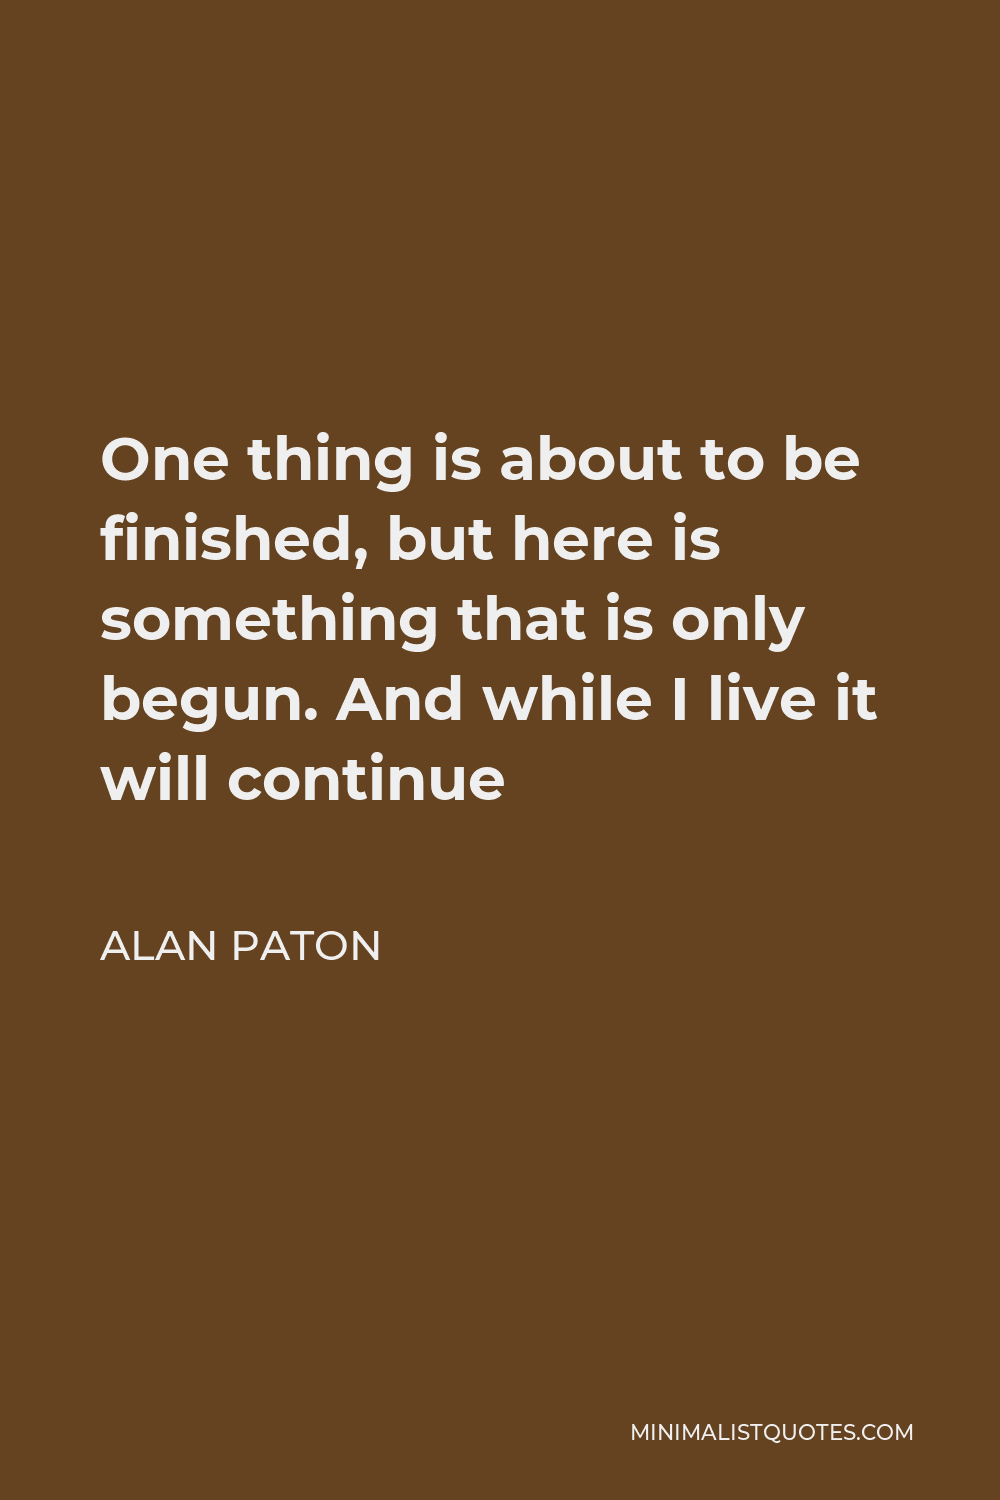 Alan Paton Quote - One thing is about to be finished, but here is something that is only begun. And while I live it will continue